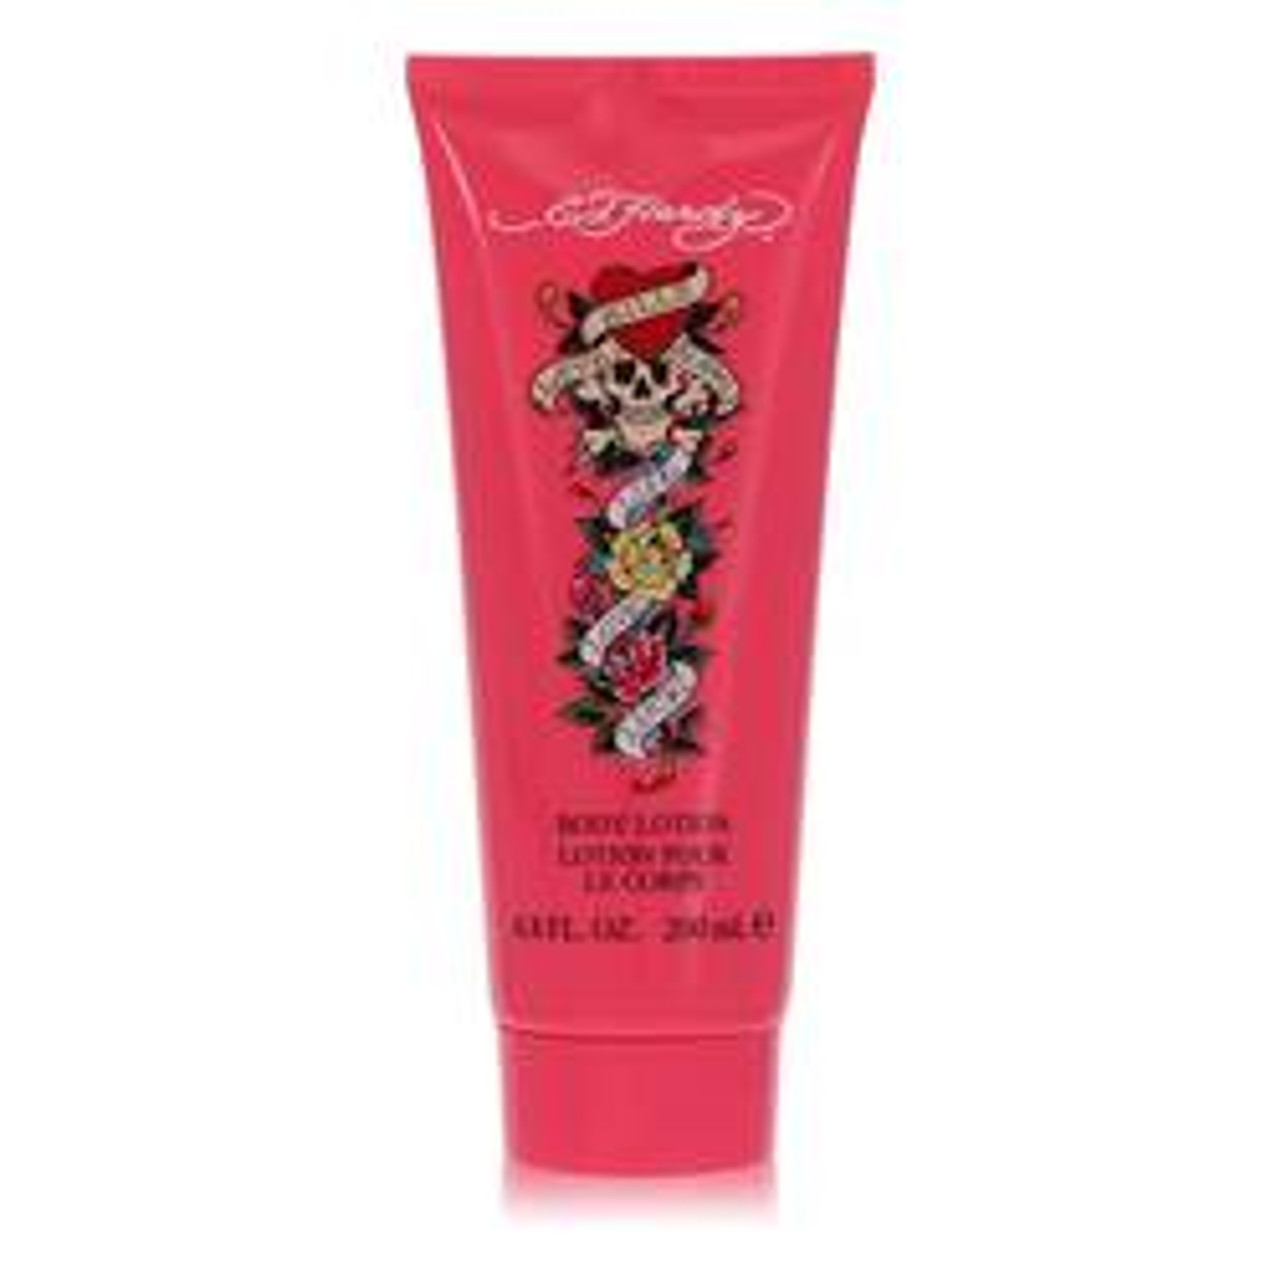 Ed Hardy Perfume By Christian Audigier Body Lotion 6.8 oz for Women - [From 31.00 - Choose pk Qty ] - *Ships from Miami